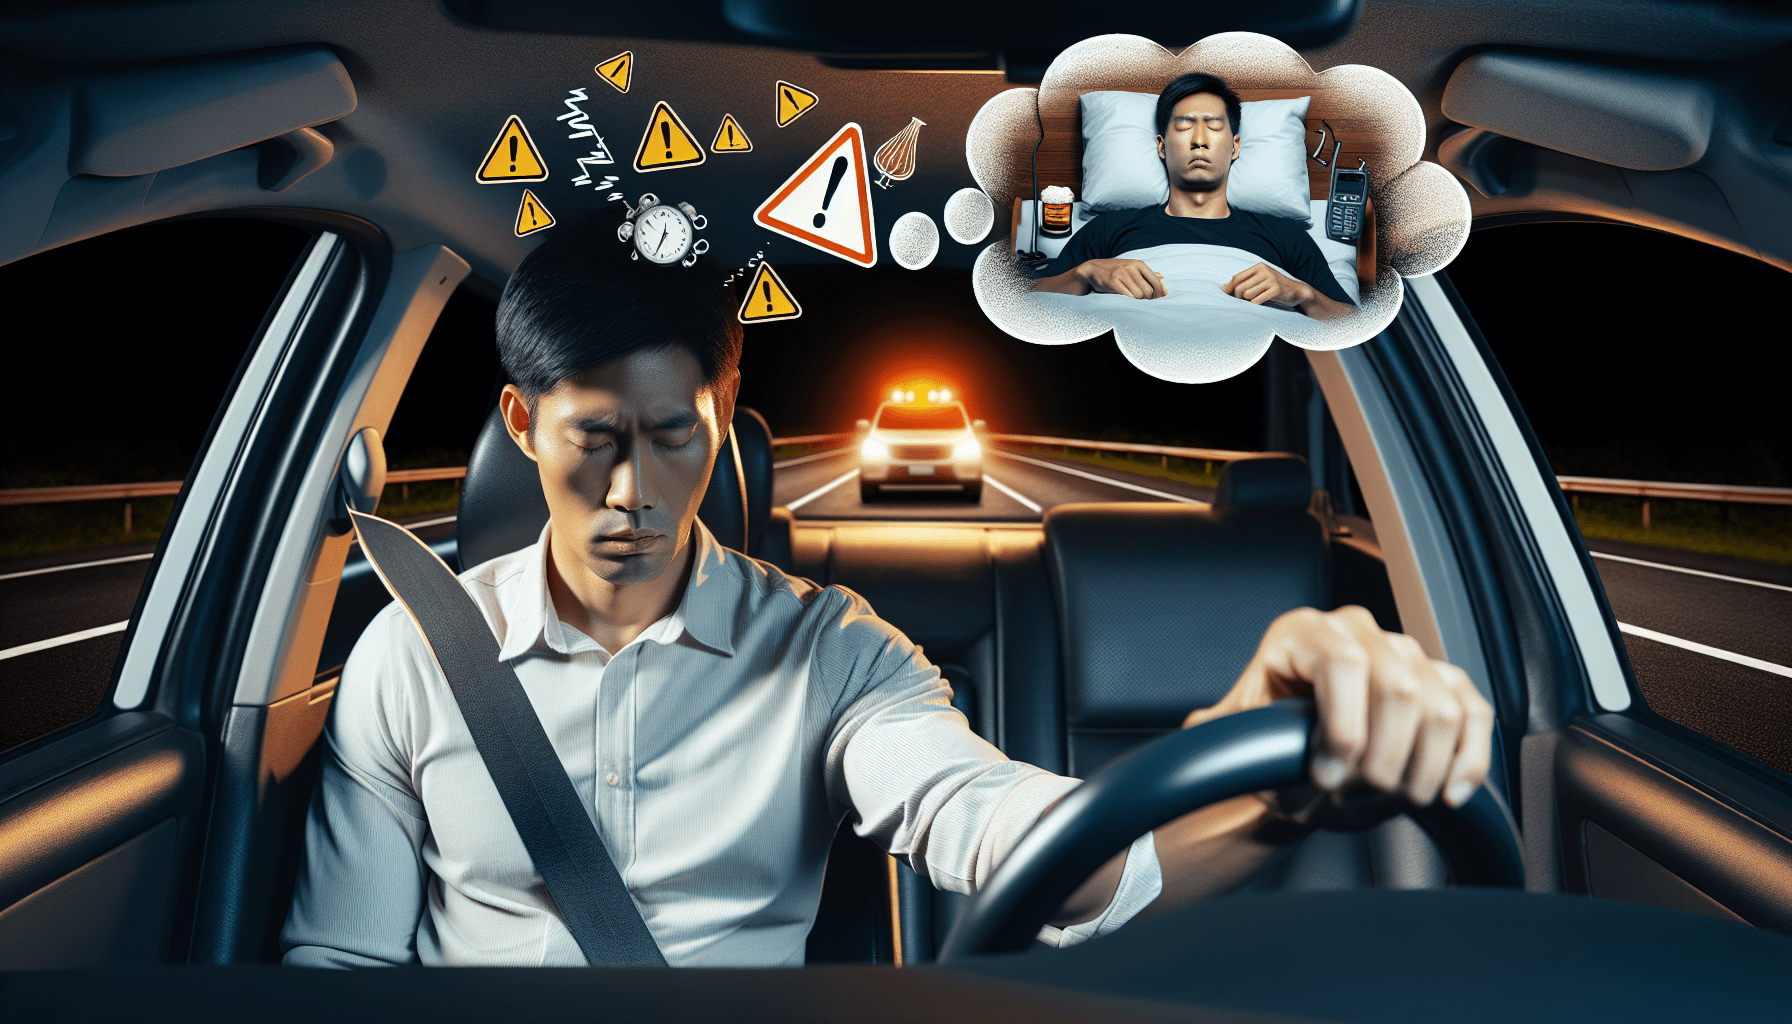 Sleep Apnea And Driving: Important Safety Considerations